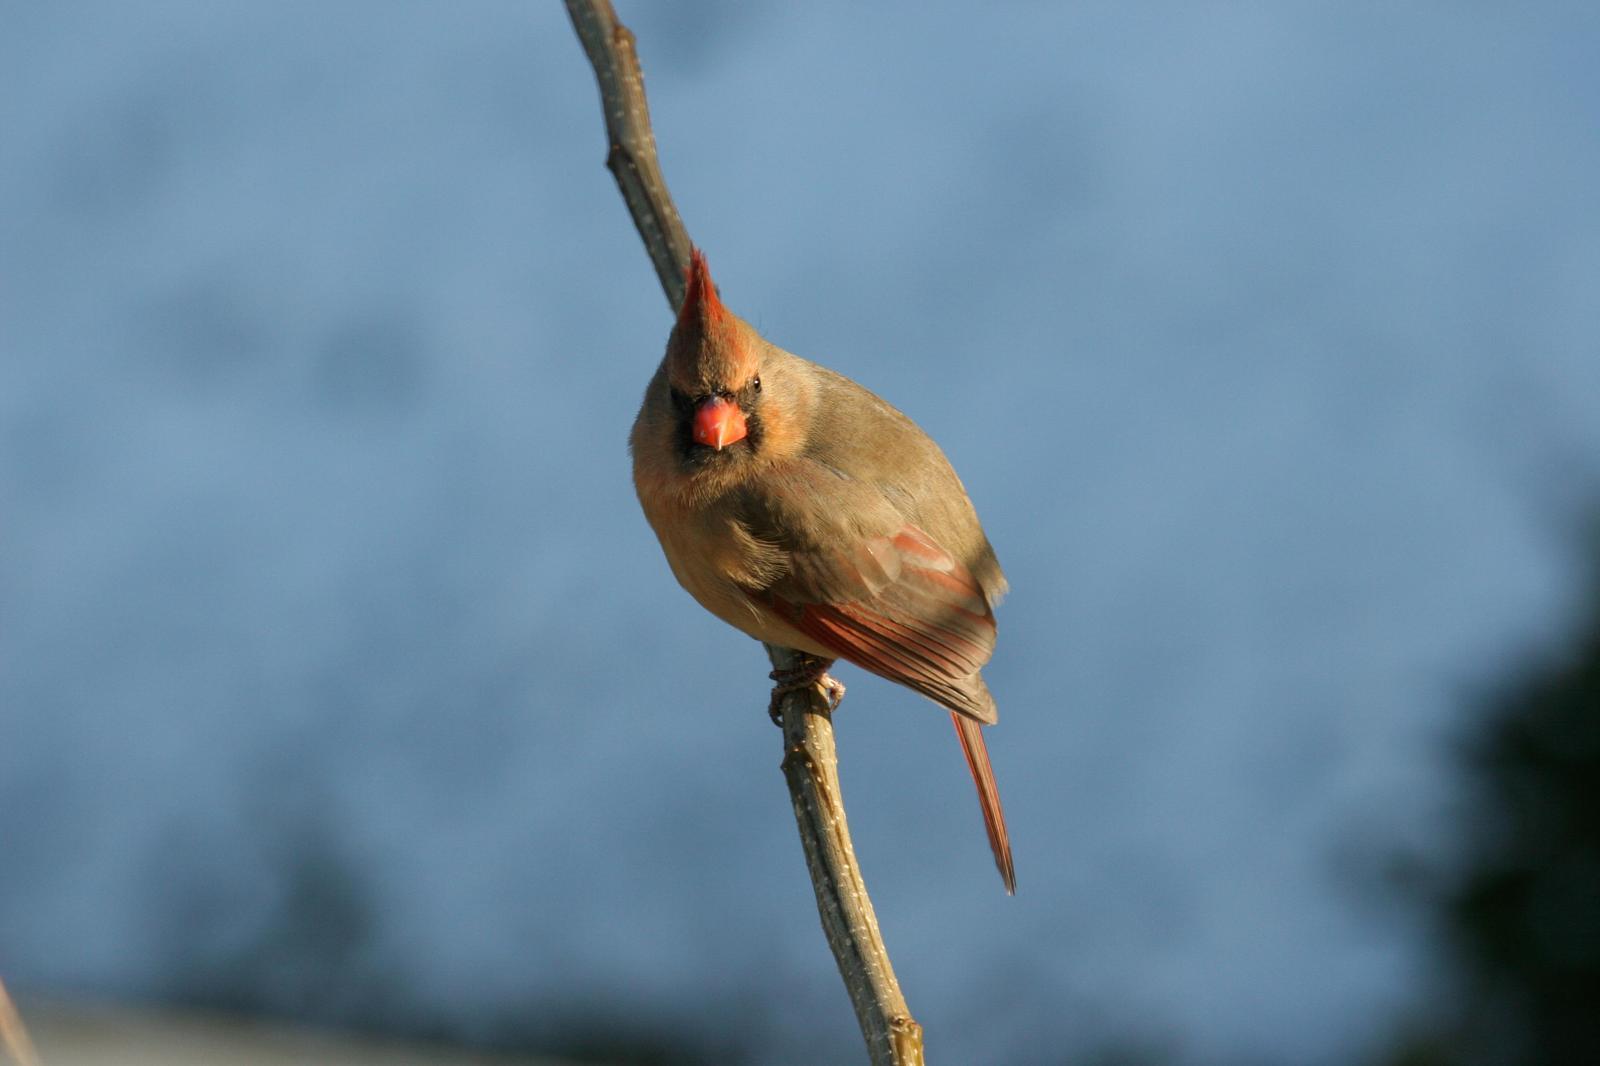 Northern Cardinal Photo by Roseanne CALECA